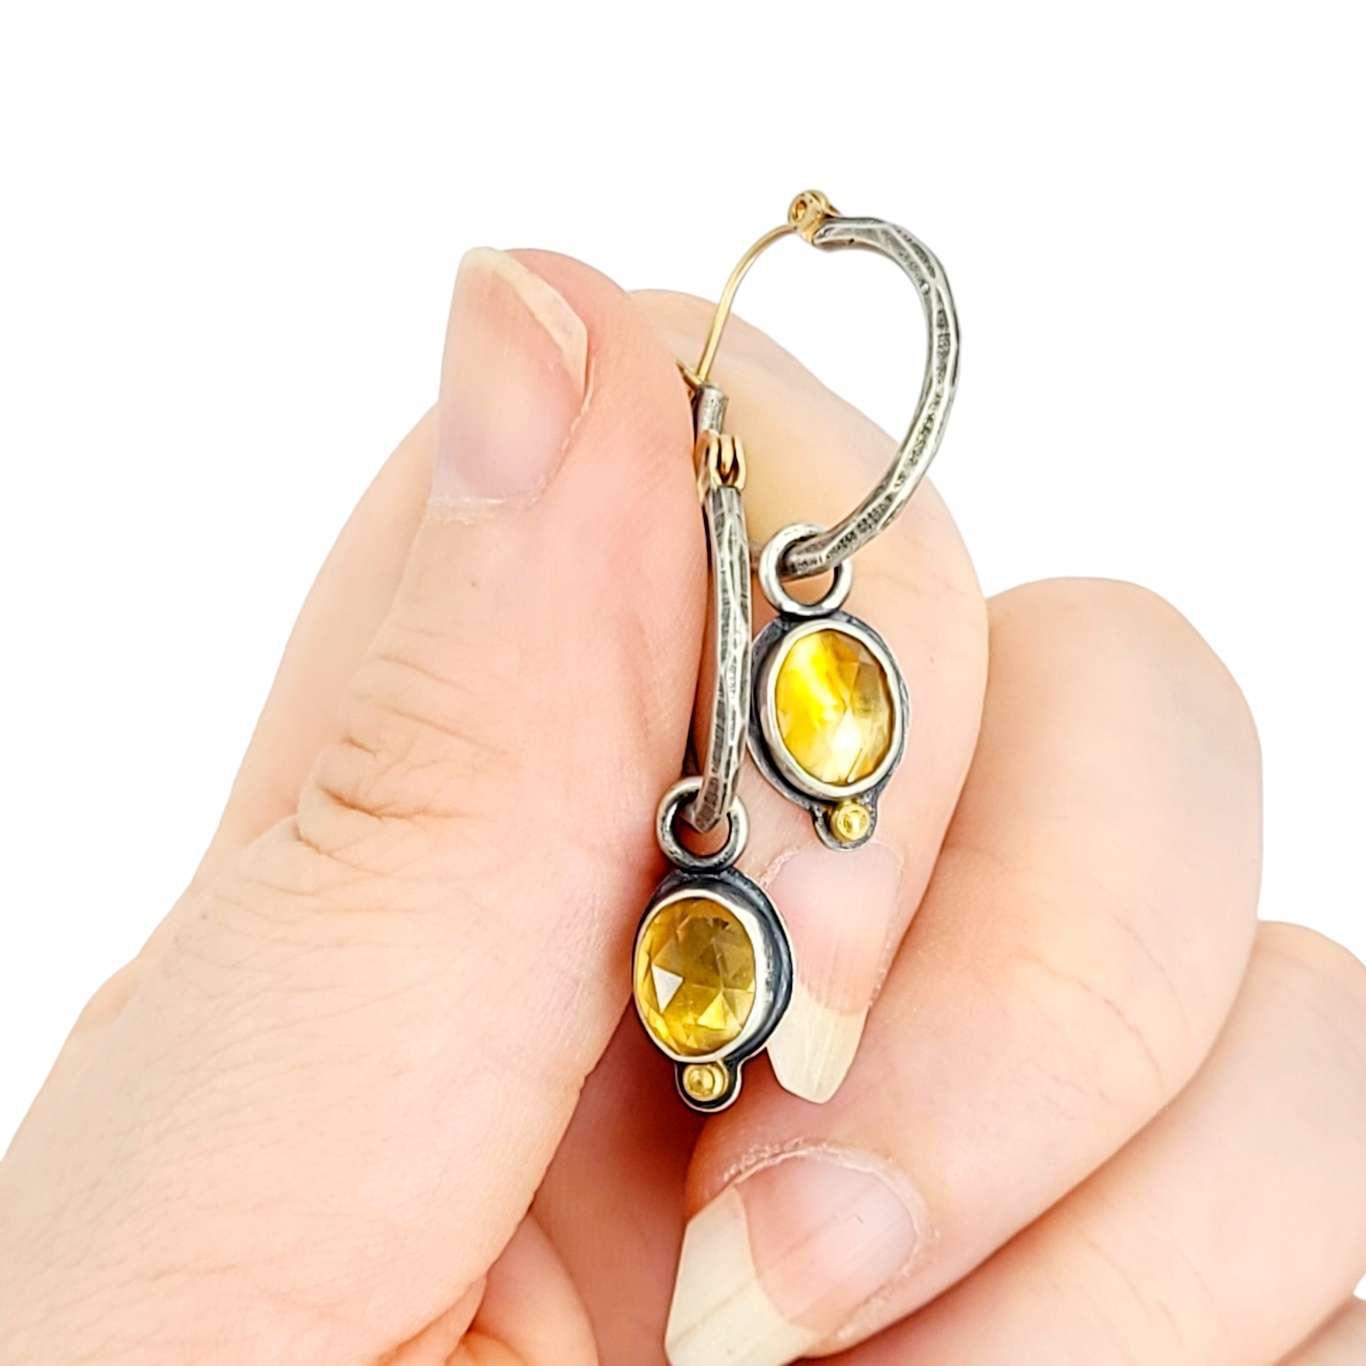 Earrings - Rose Cut Citrine Hoops in Sterling Silver with 18k and 14k Gold by Allison Kallaway